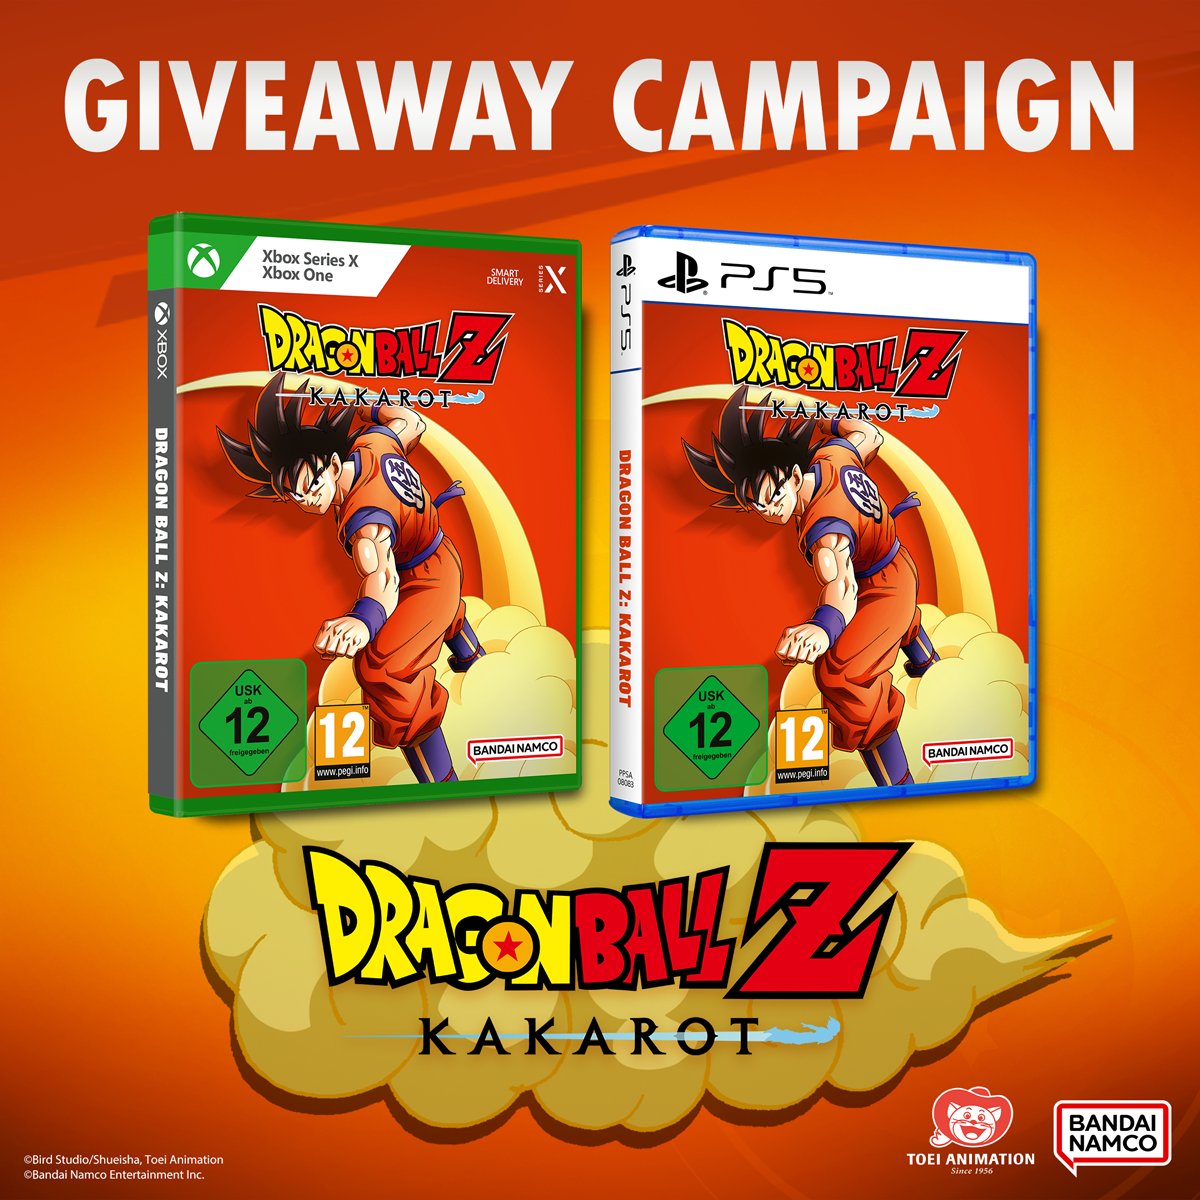 🎁GIVEAWAY🎁 In honour of #GokuDay on 9th May, we are giving away a special video game 'Dragon Ball Z: Kakarot' ! To participate 👉Follow @ToeiAnimationEU 👉RT this post Drawing will take place on 16 May and 2 winners will be contacted by DM. toei-animation.com/terms-and-cond…